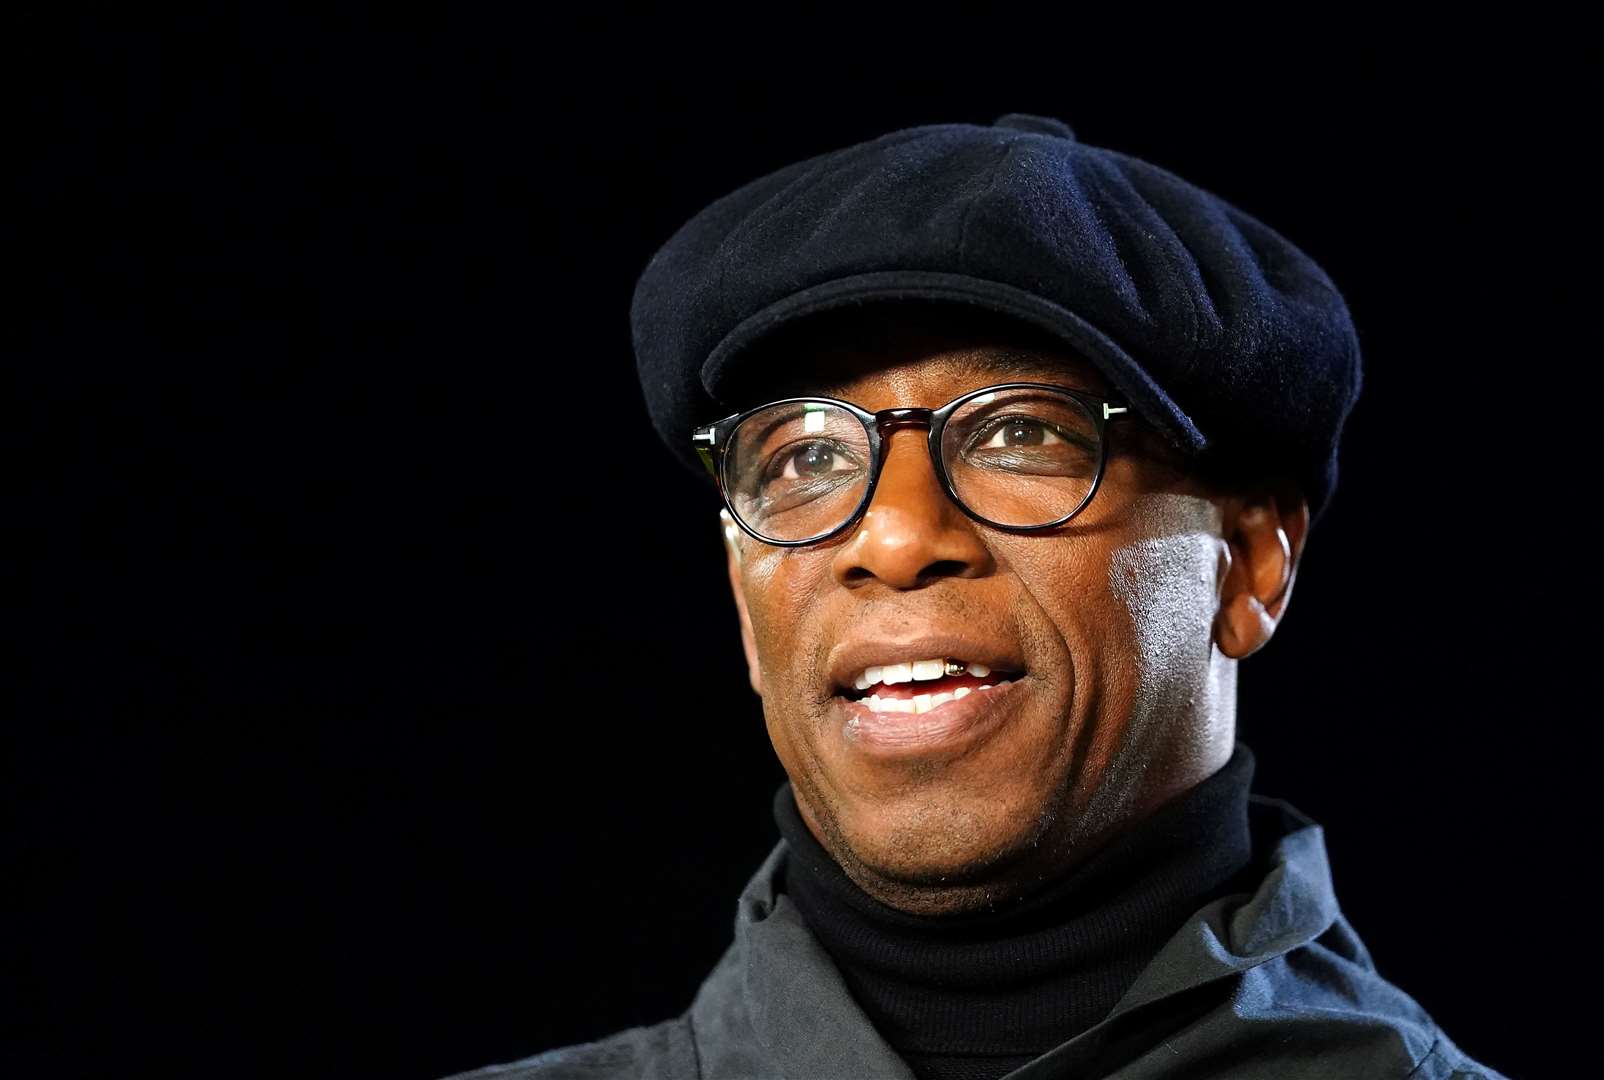 Ian Wright said he will not be appearing on Match Of The Day on Saturday in ‘solidarity’ (Zac Goodwin/PA)